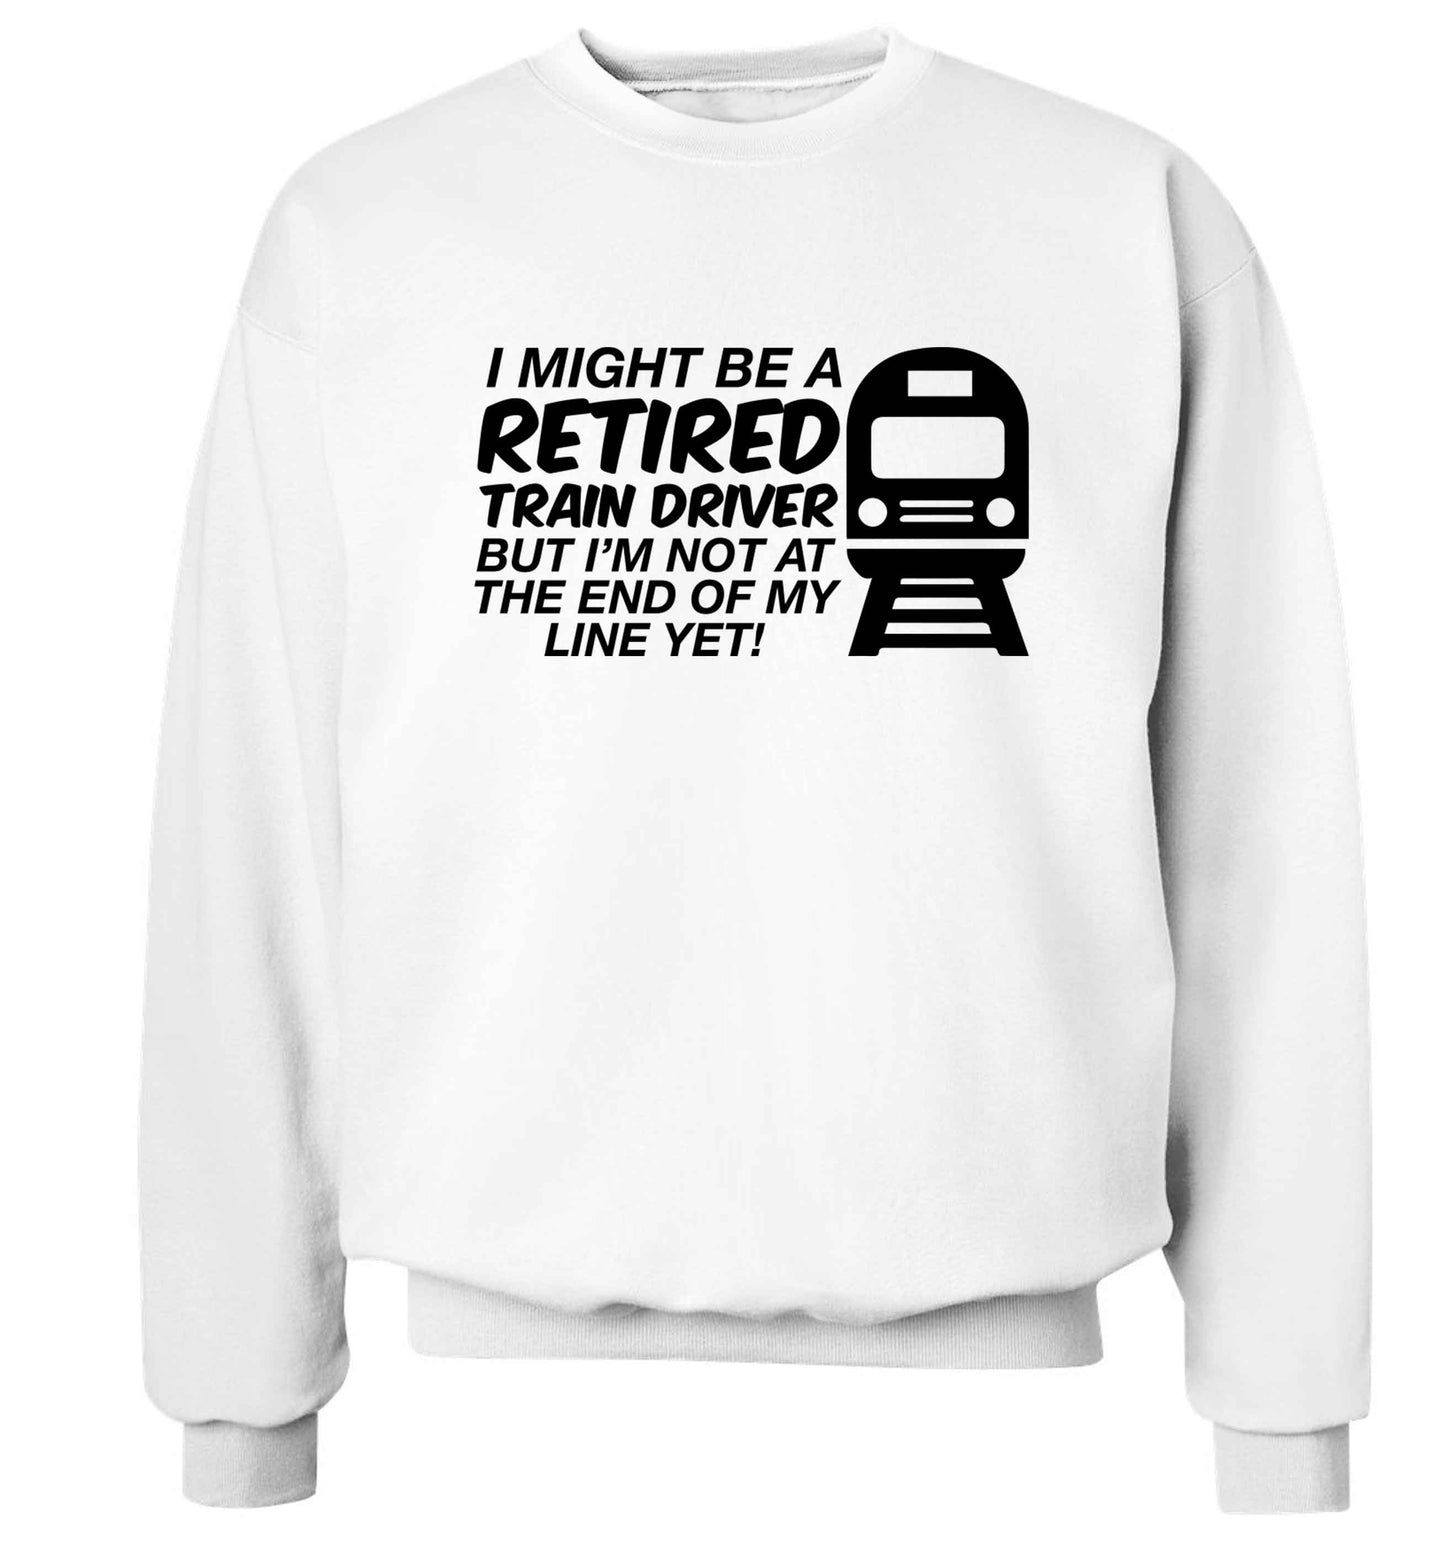 Retired train driver but I'm not at the end of my line yet Adult's unisex white Sweater 2XL